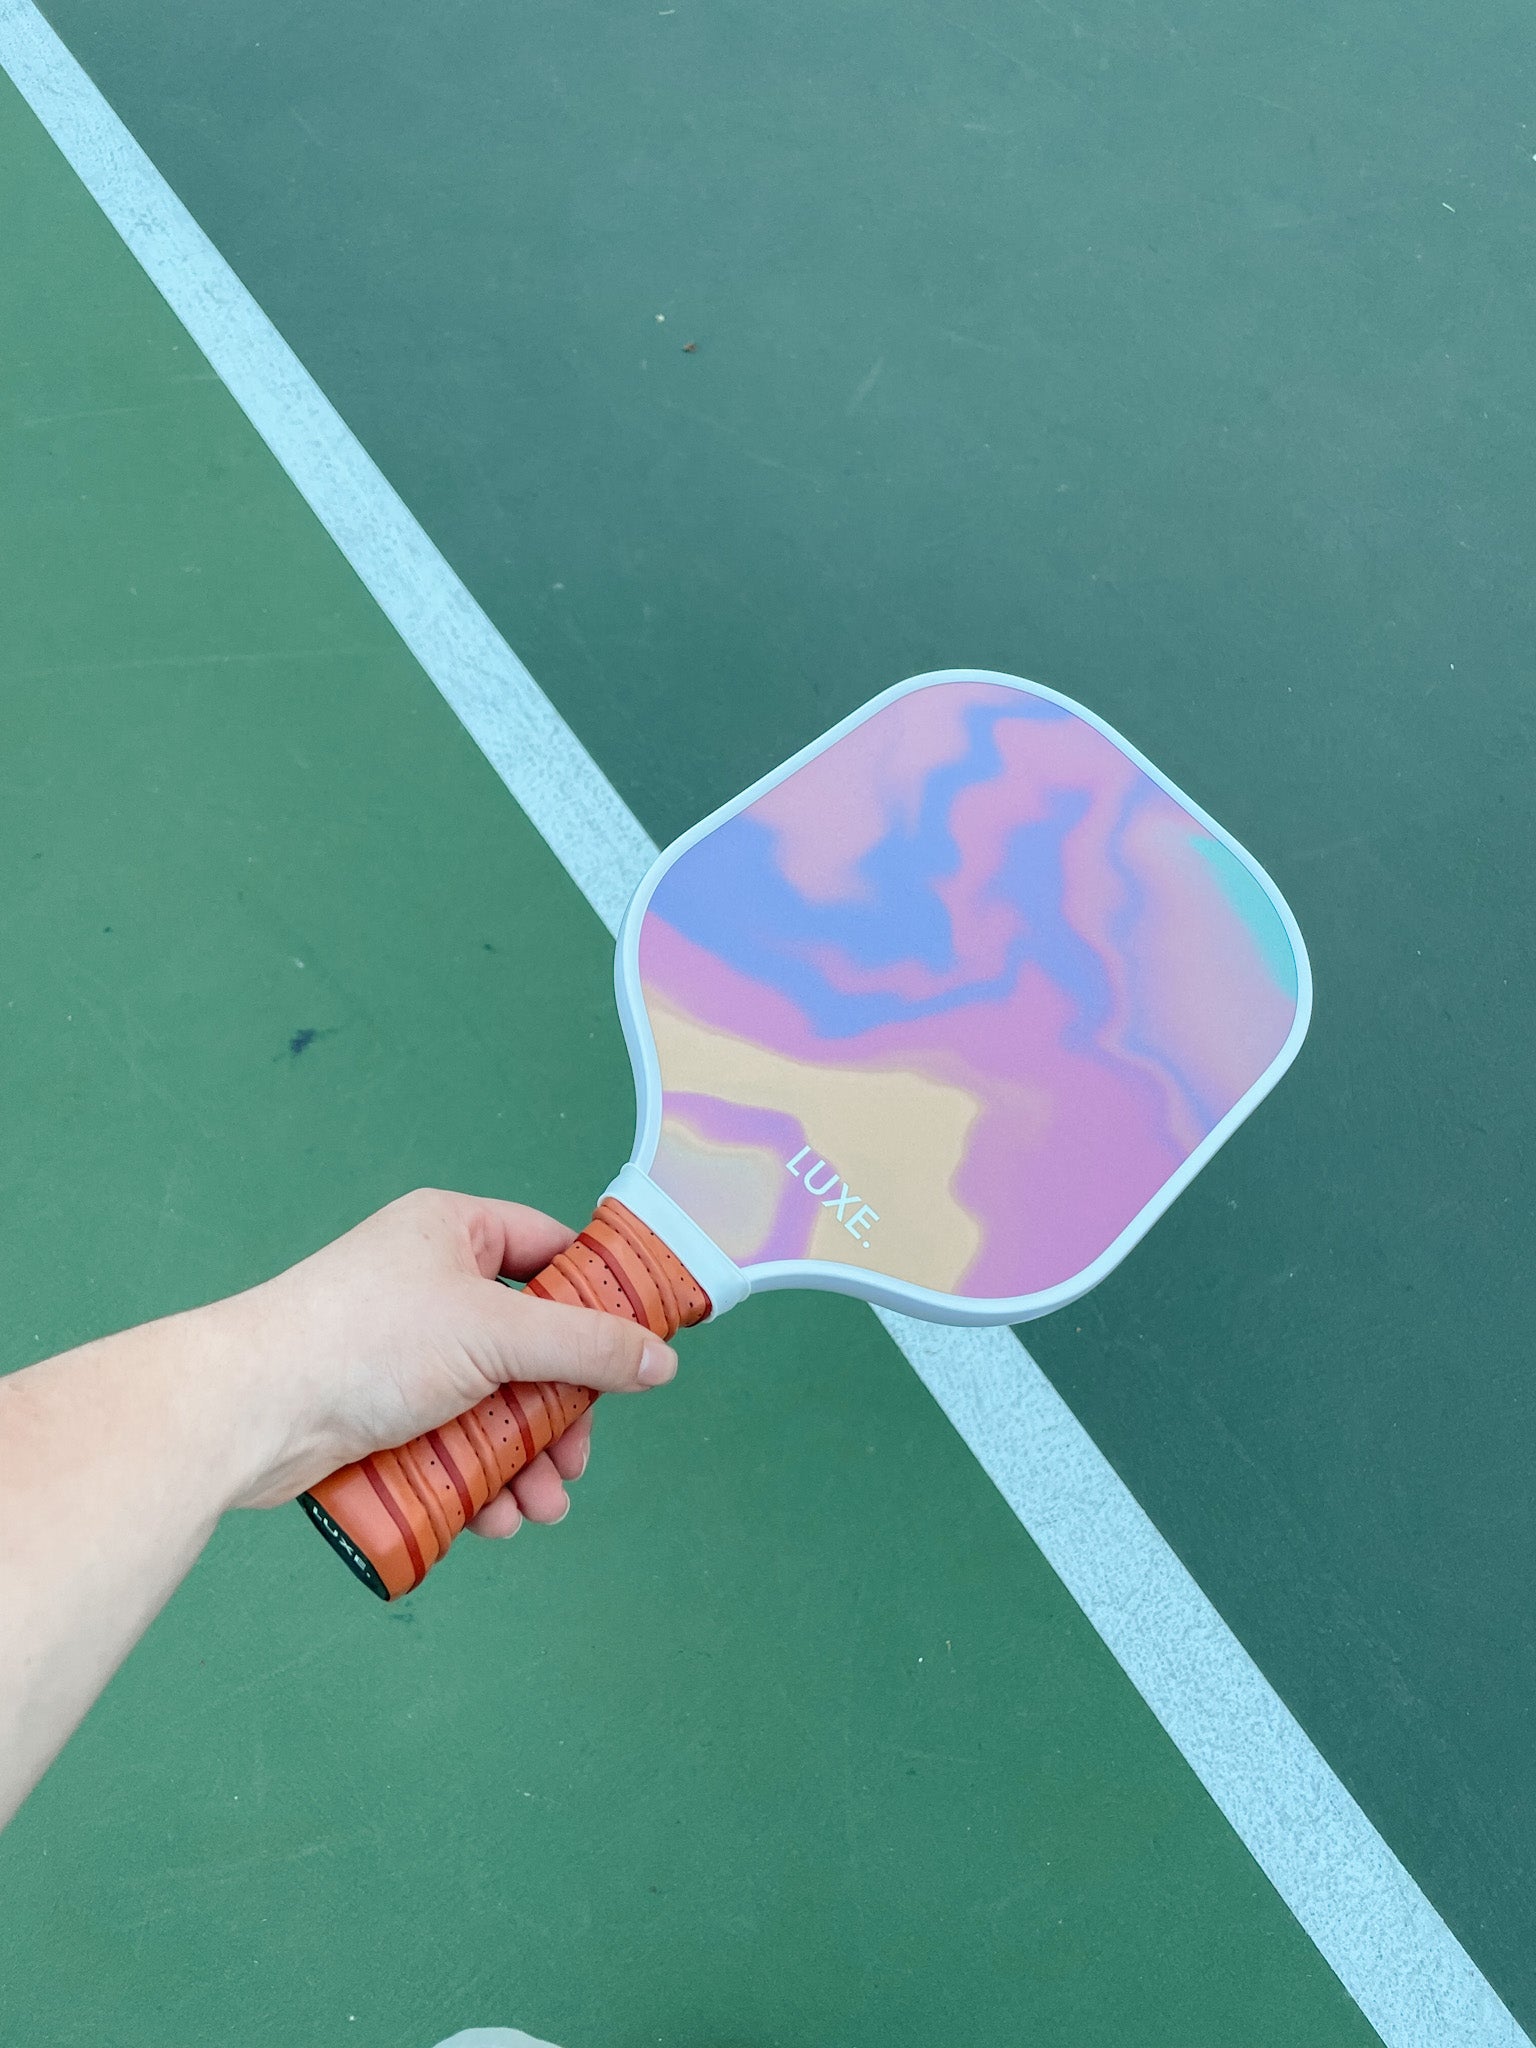 Watercolor LUXE Pickleball Paddle. Cute and aesthetic pickleball paddles